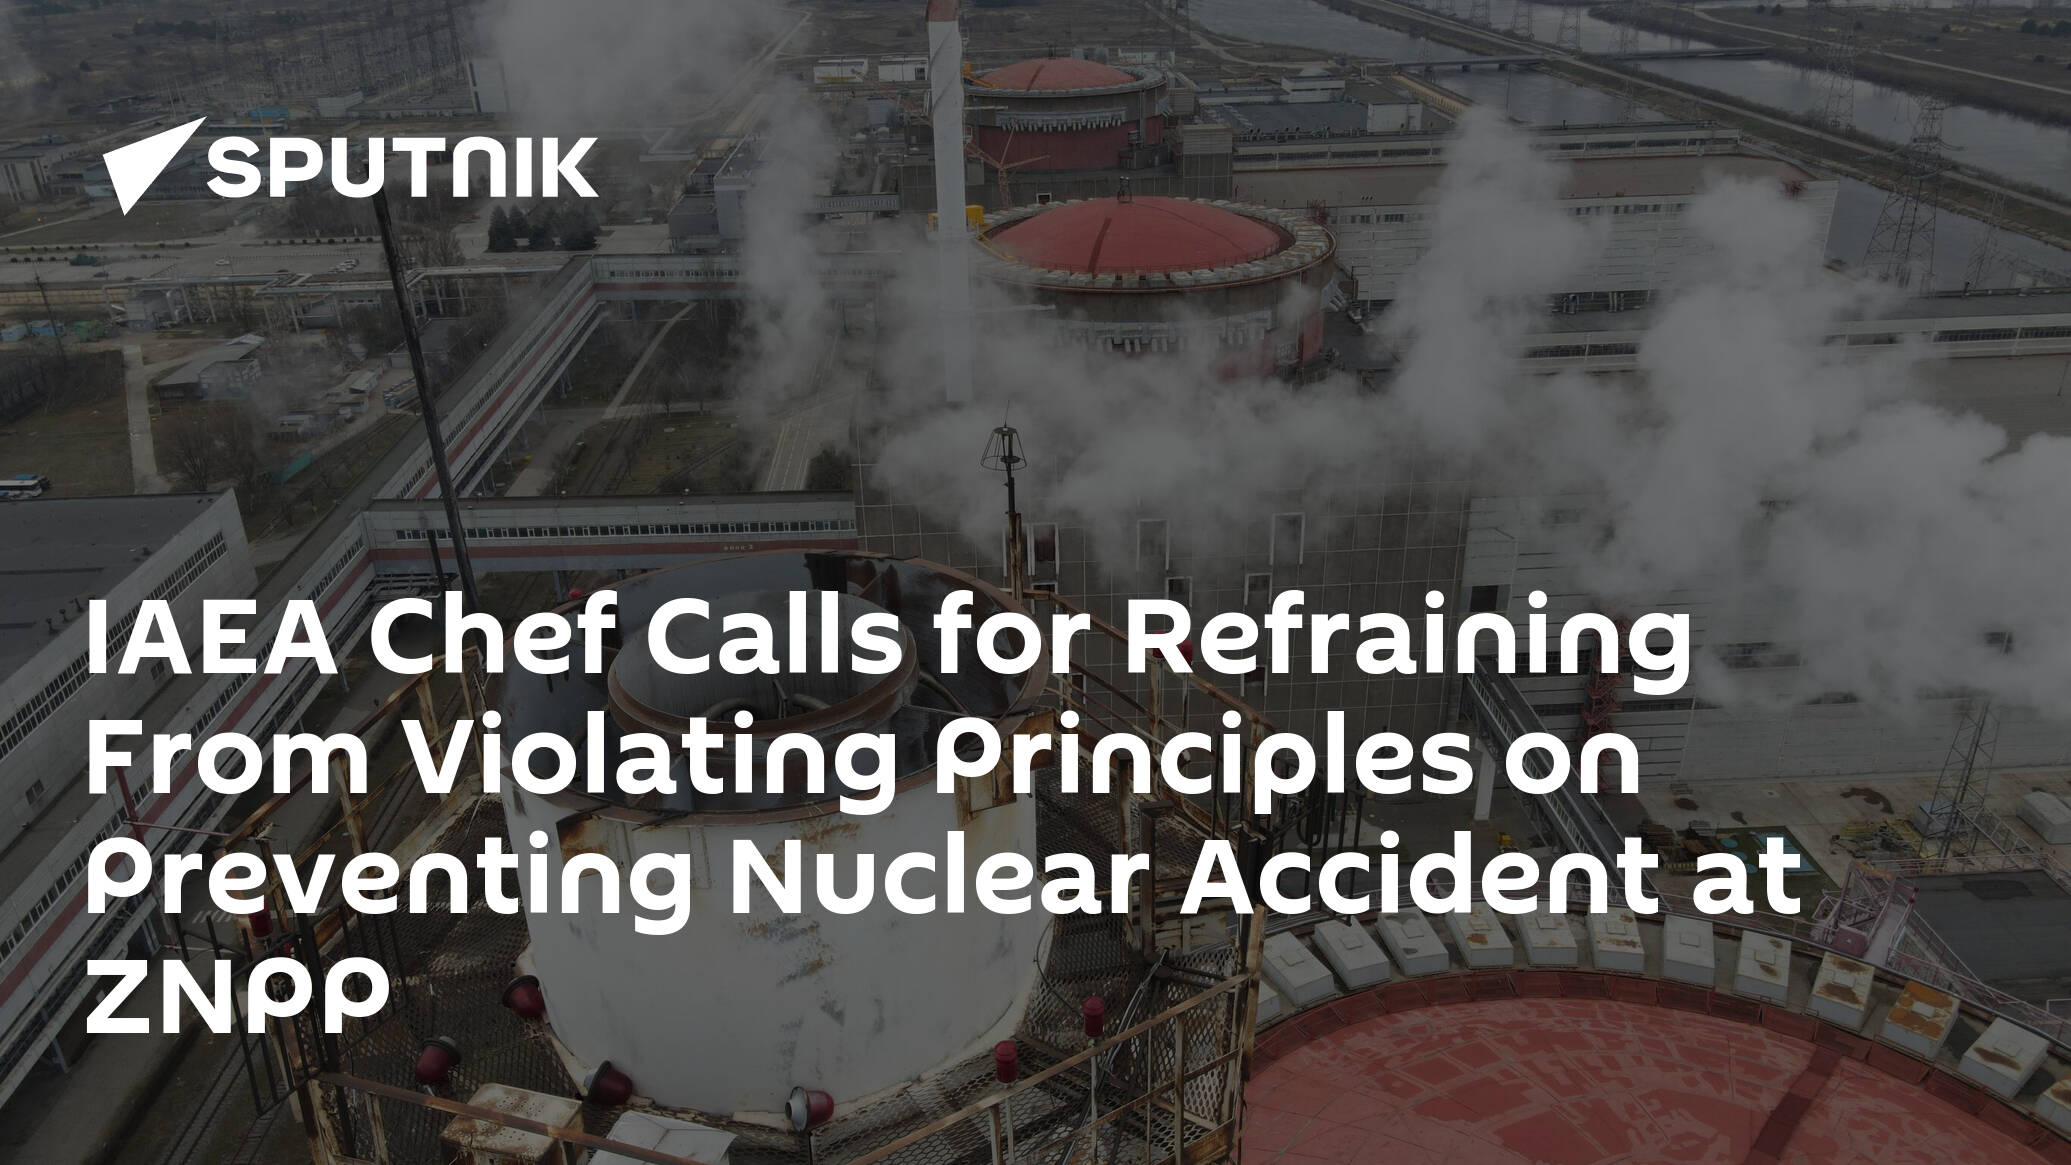 IAEA Chef Calls for Refraining From Violating Principles on Preventing Nuclear Accident at ZNPP